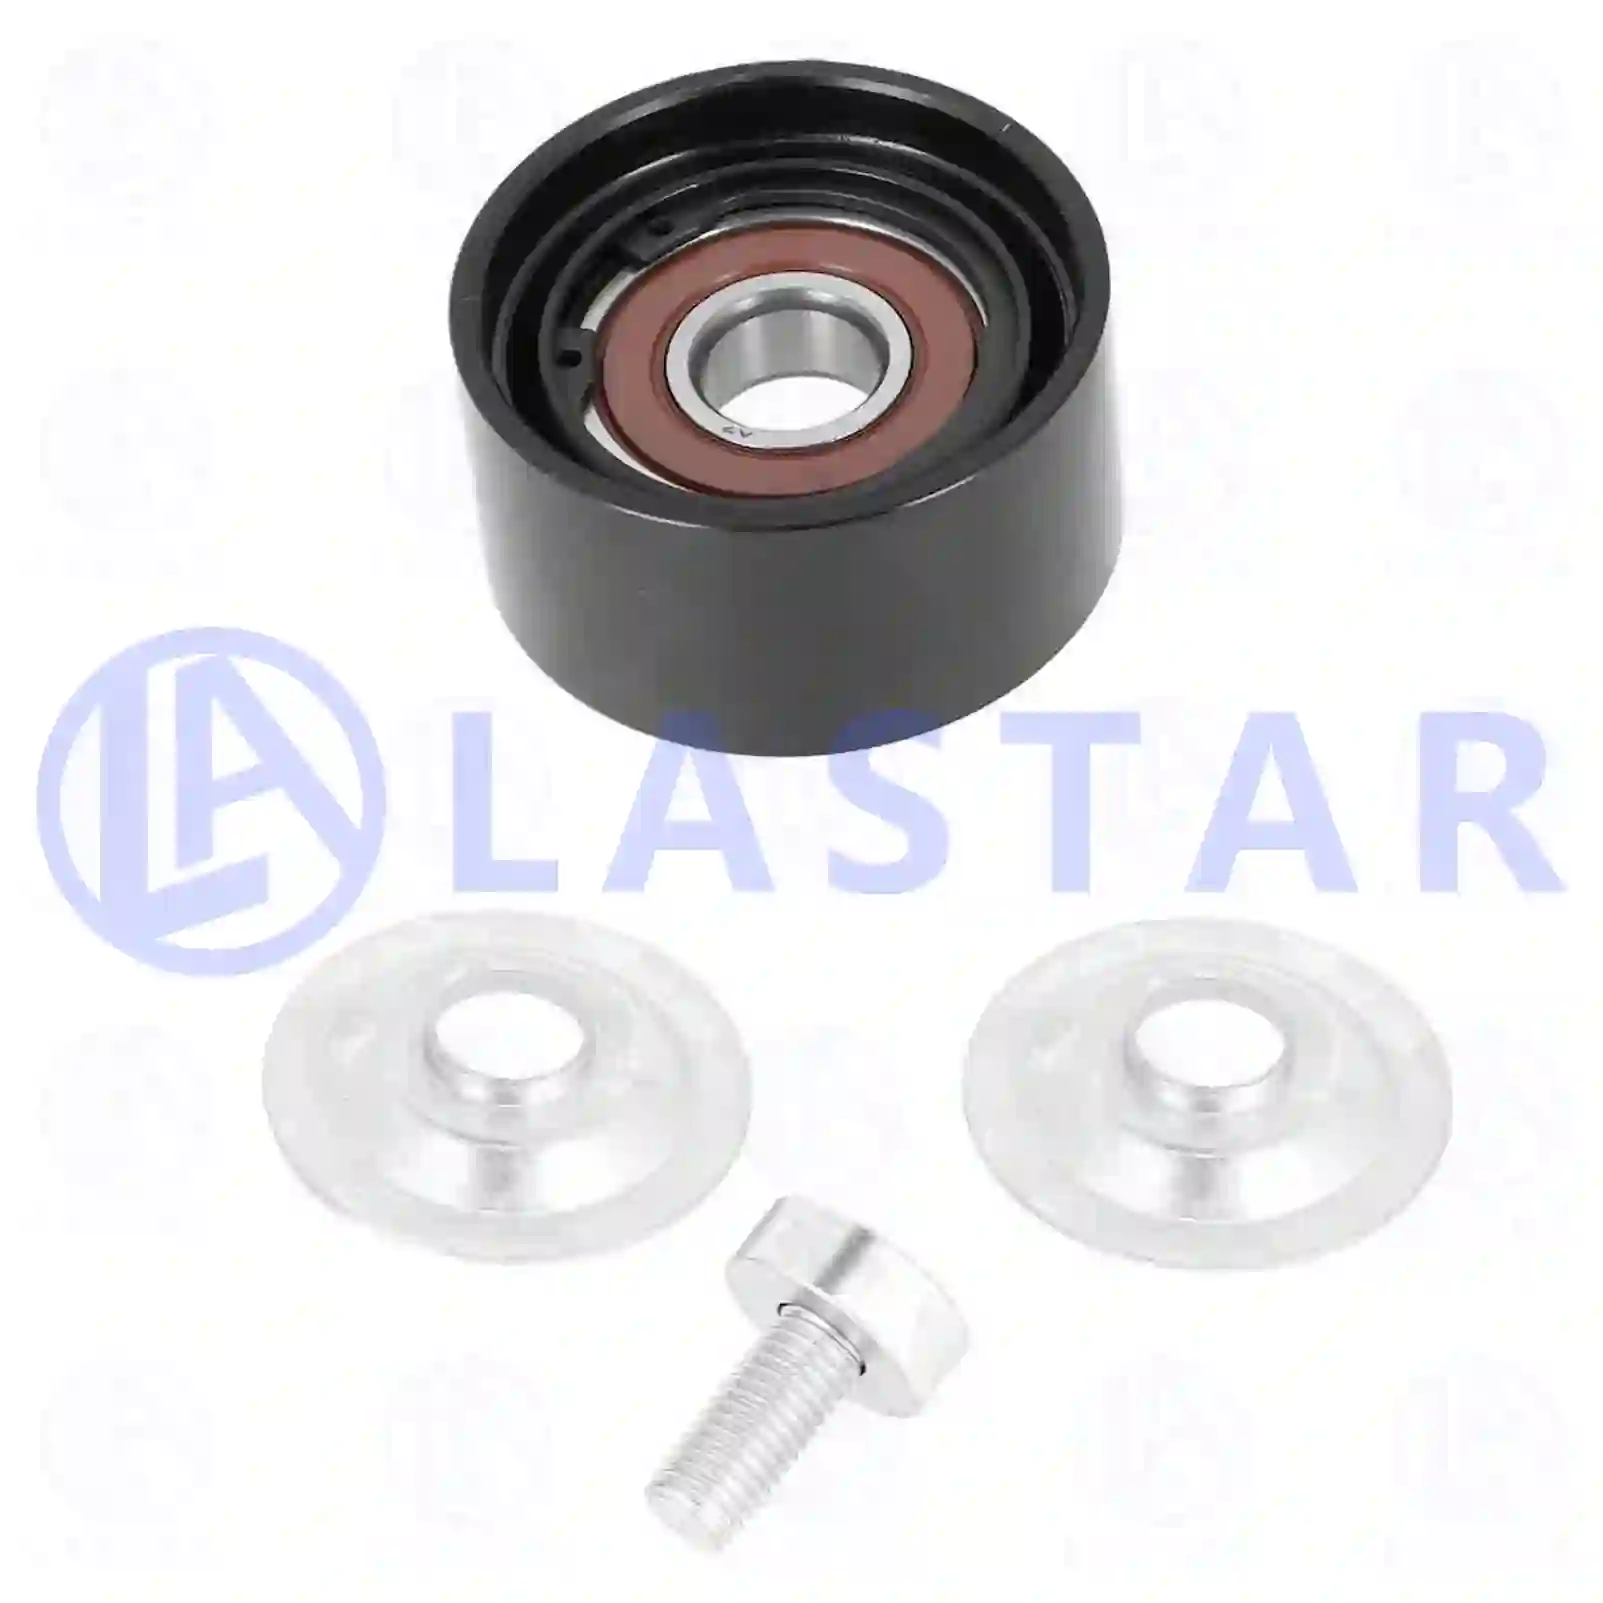 Tension roller, with screw, 77707964, 0005501933, 0005501933, 4572001070, ZG02181-0008 ||  77707964 Lastar Spare Part | Truck Spare Parts, Auotomotive Spare Parts Tension roller, with screw, 77707964, 0005501933, 0005501933, 4572001070, ZG02181-0008 ||  77707964 Lastar Spare Part | Truck Spare Parts, Auotomotive Spare Parts